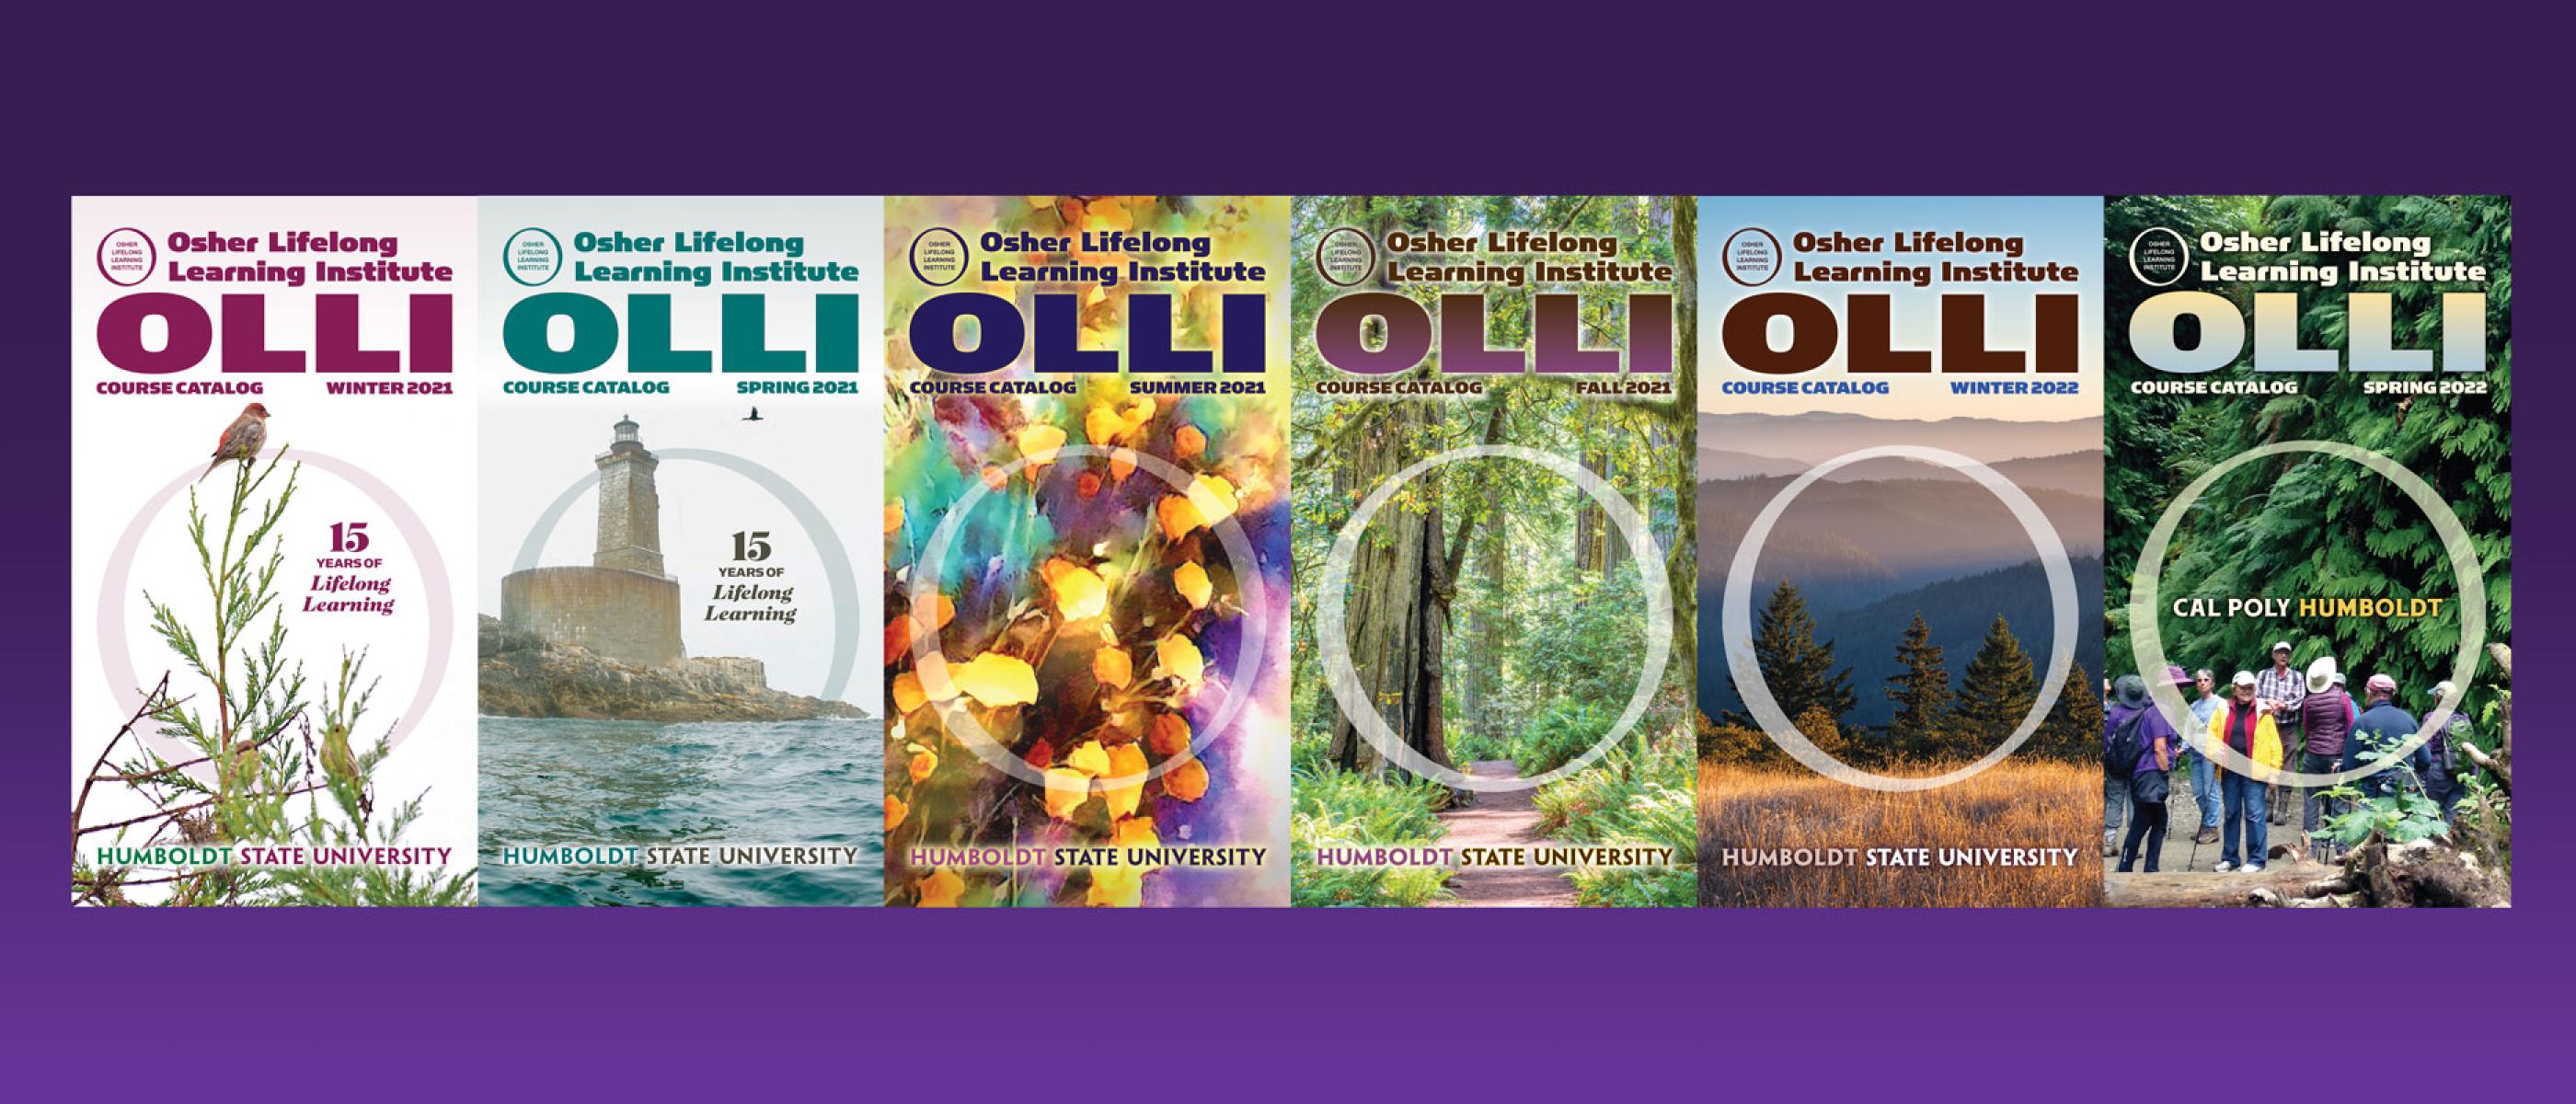 Covers of OLLI course catalogs